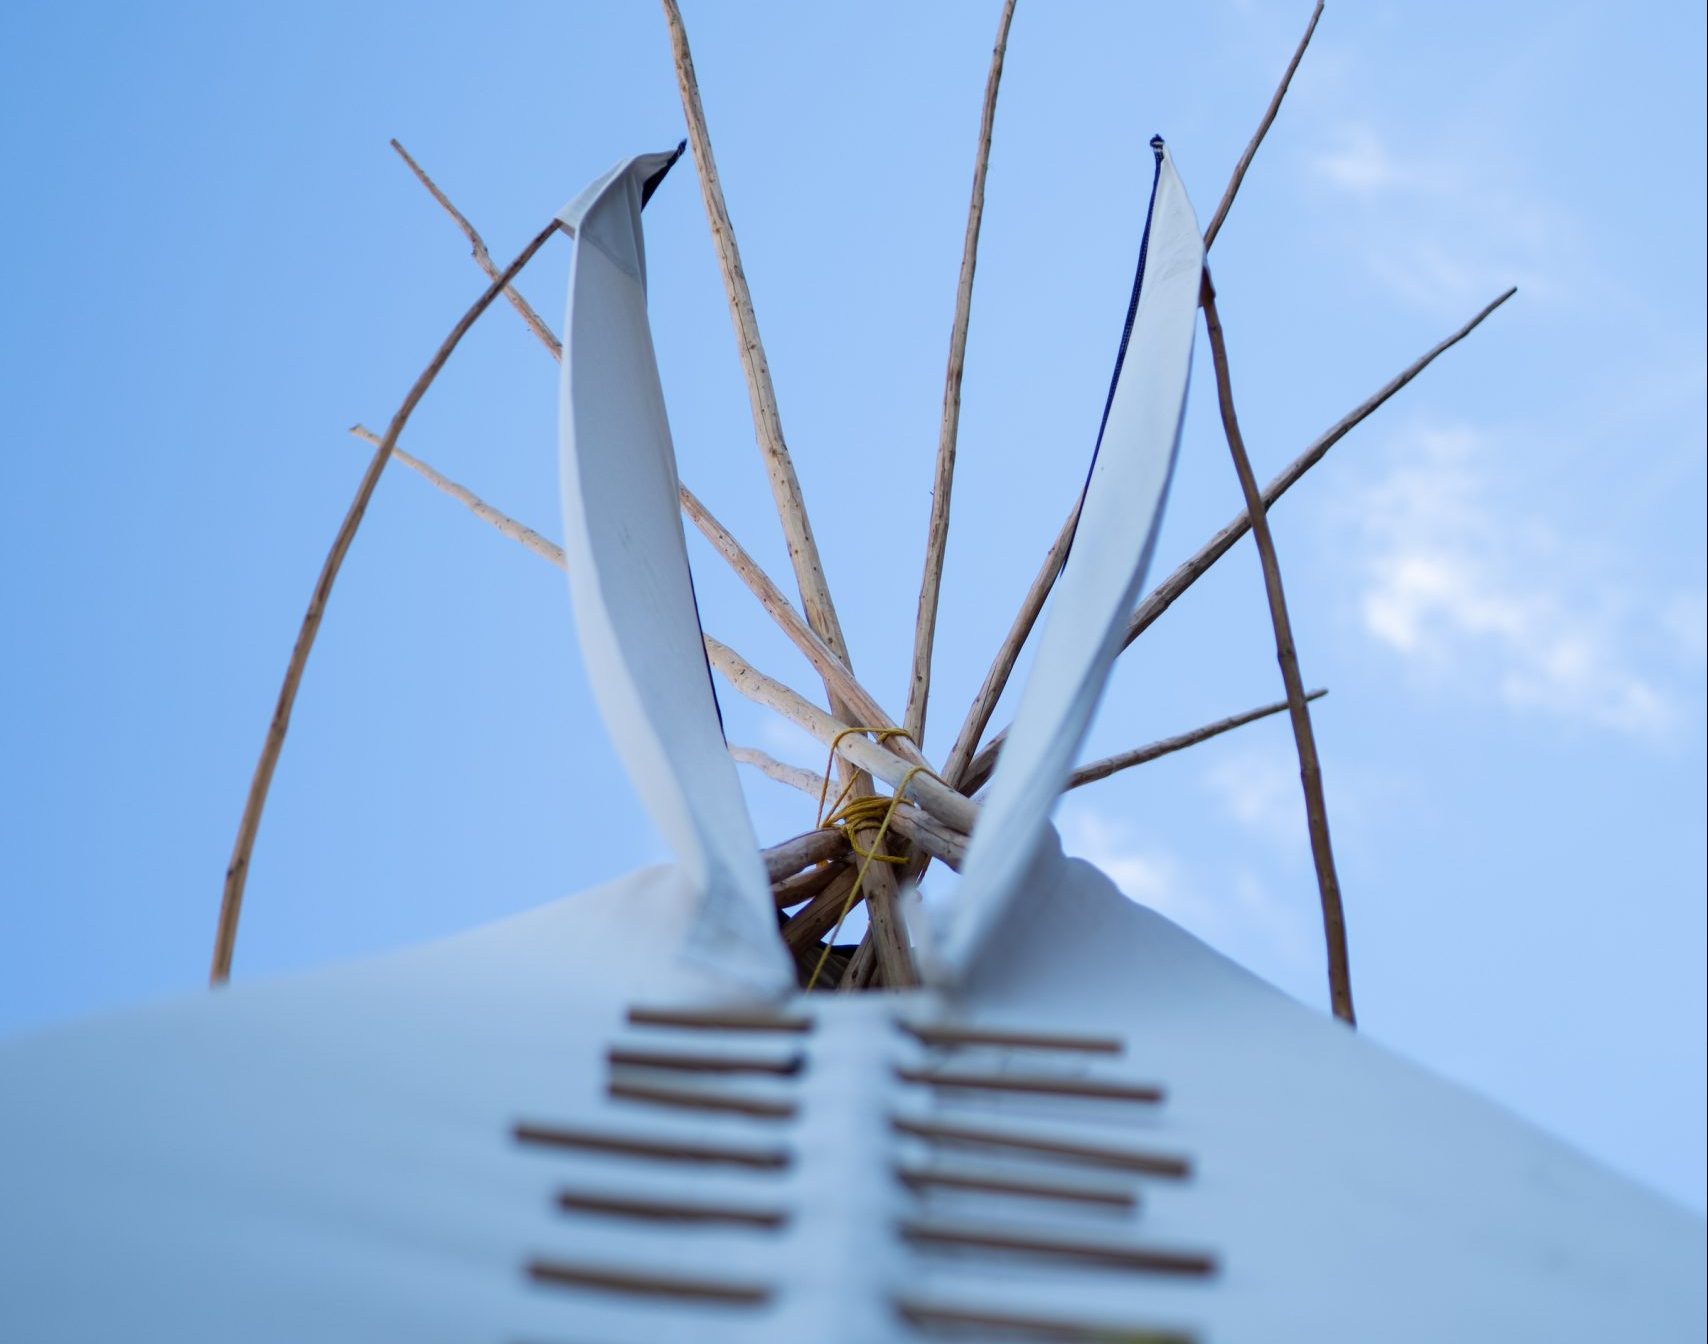 A photo of a tipi, shot at an upwards angle with a blue sky in the background.